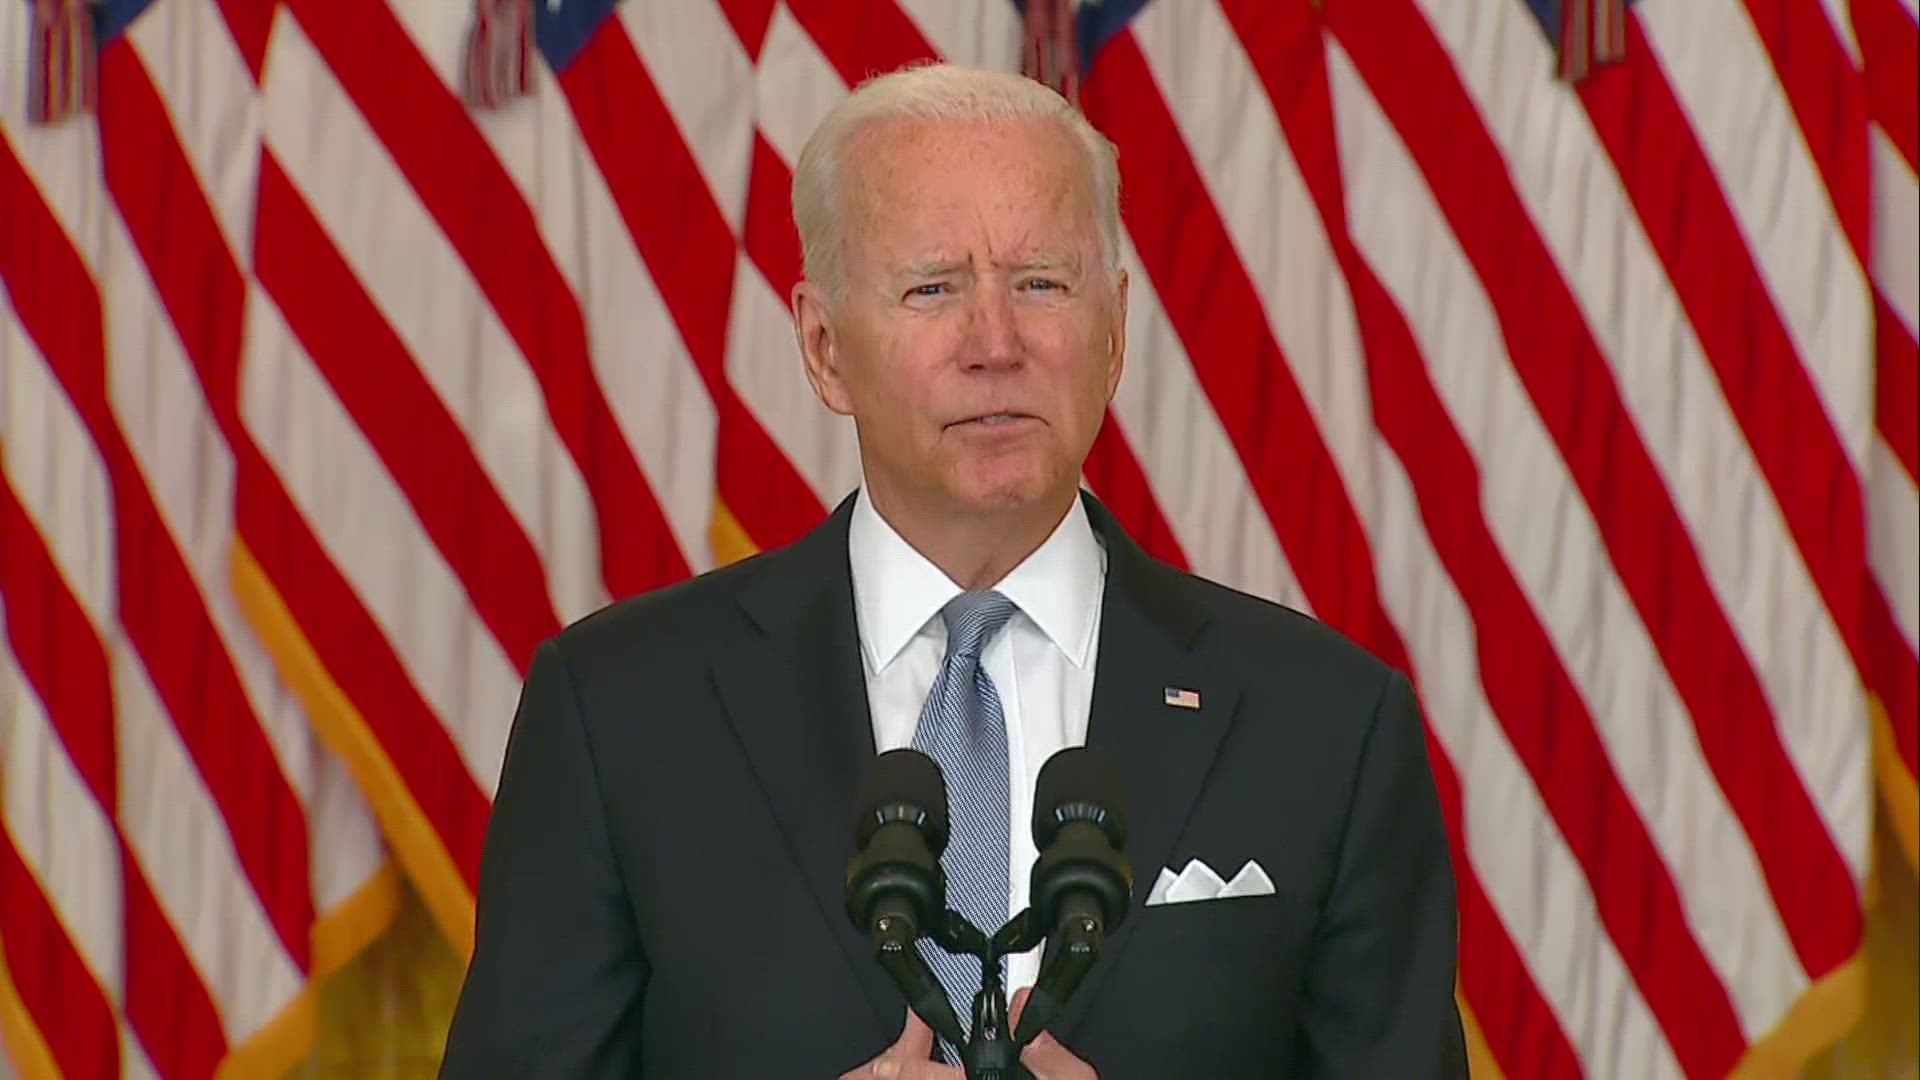 President Biden spoke Monday about the situation in Afghanistan saying the Afghanistan political leaders gave up and the Afghan military collapsed.